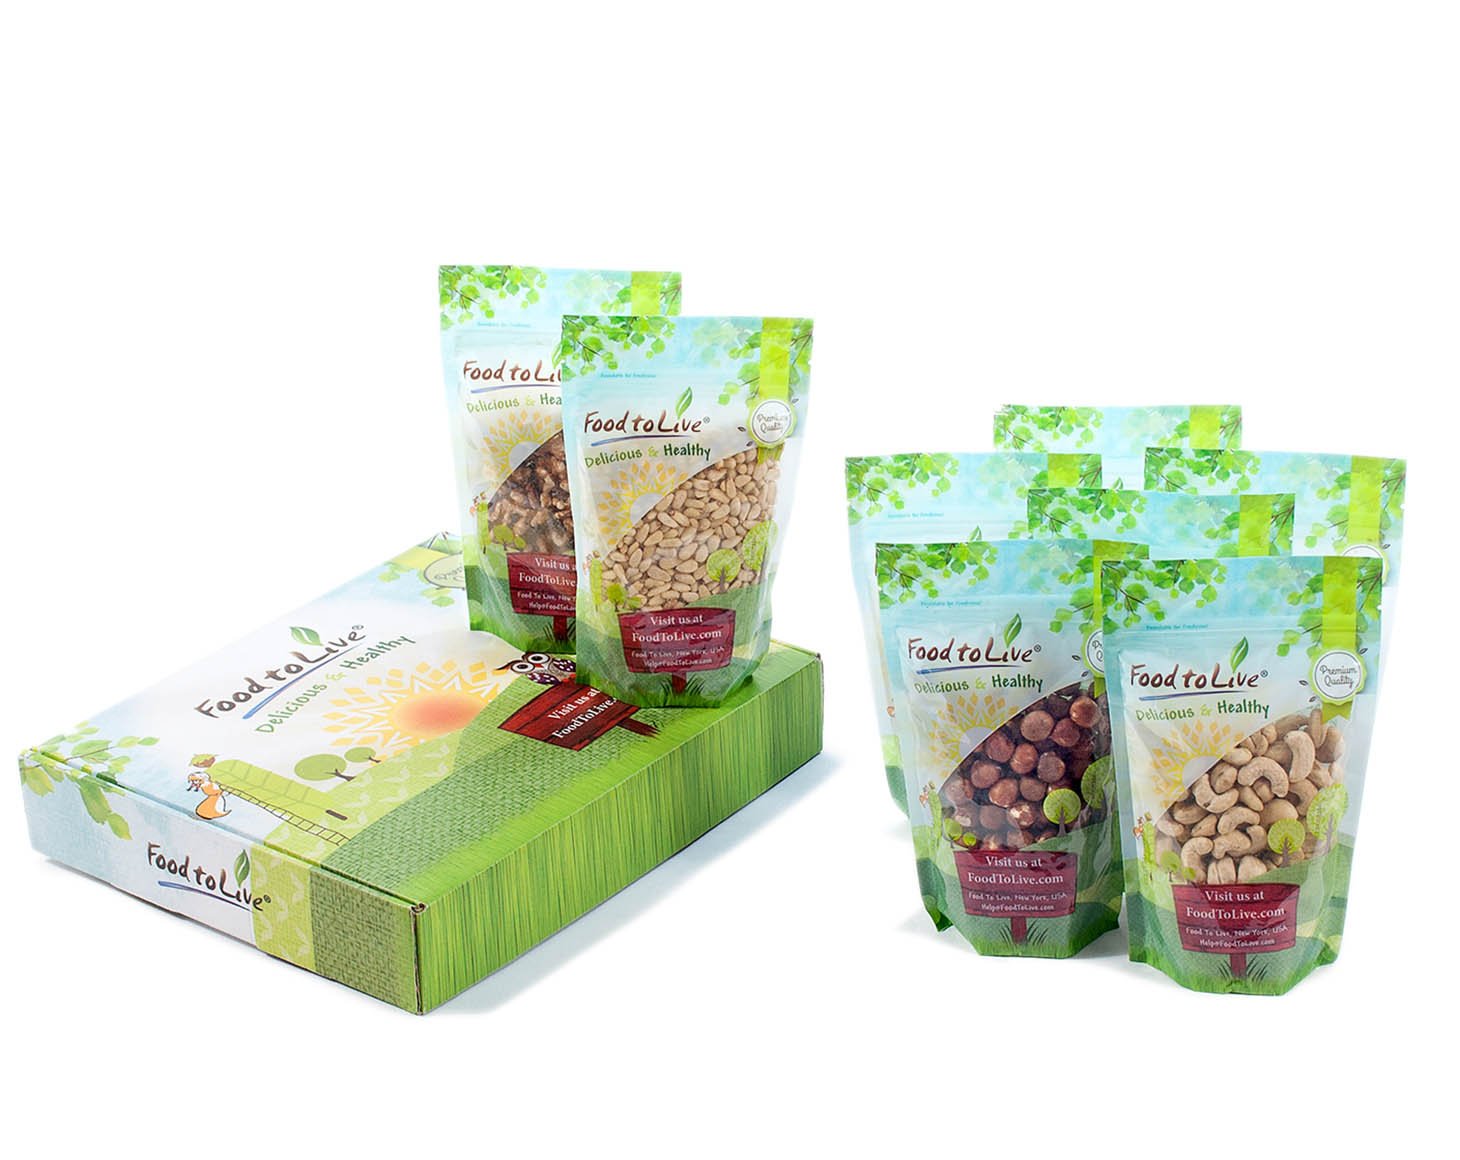 snack-bags-of-raw-nuts-gift-box-2